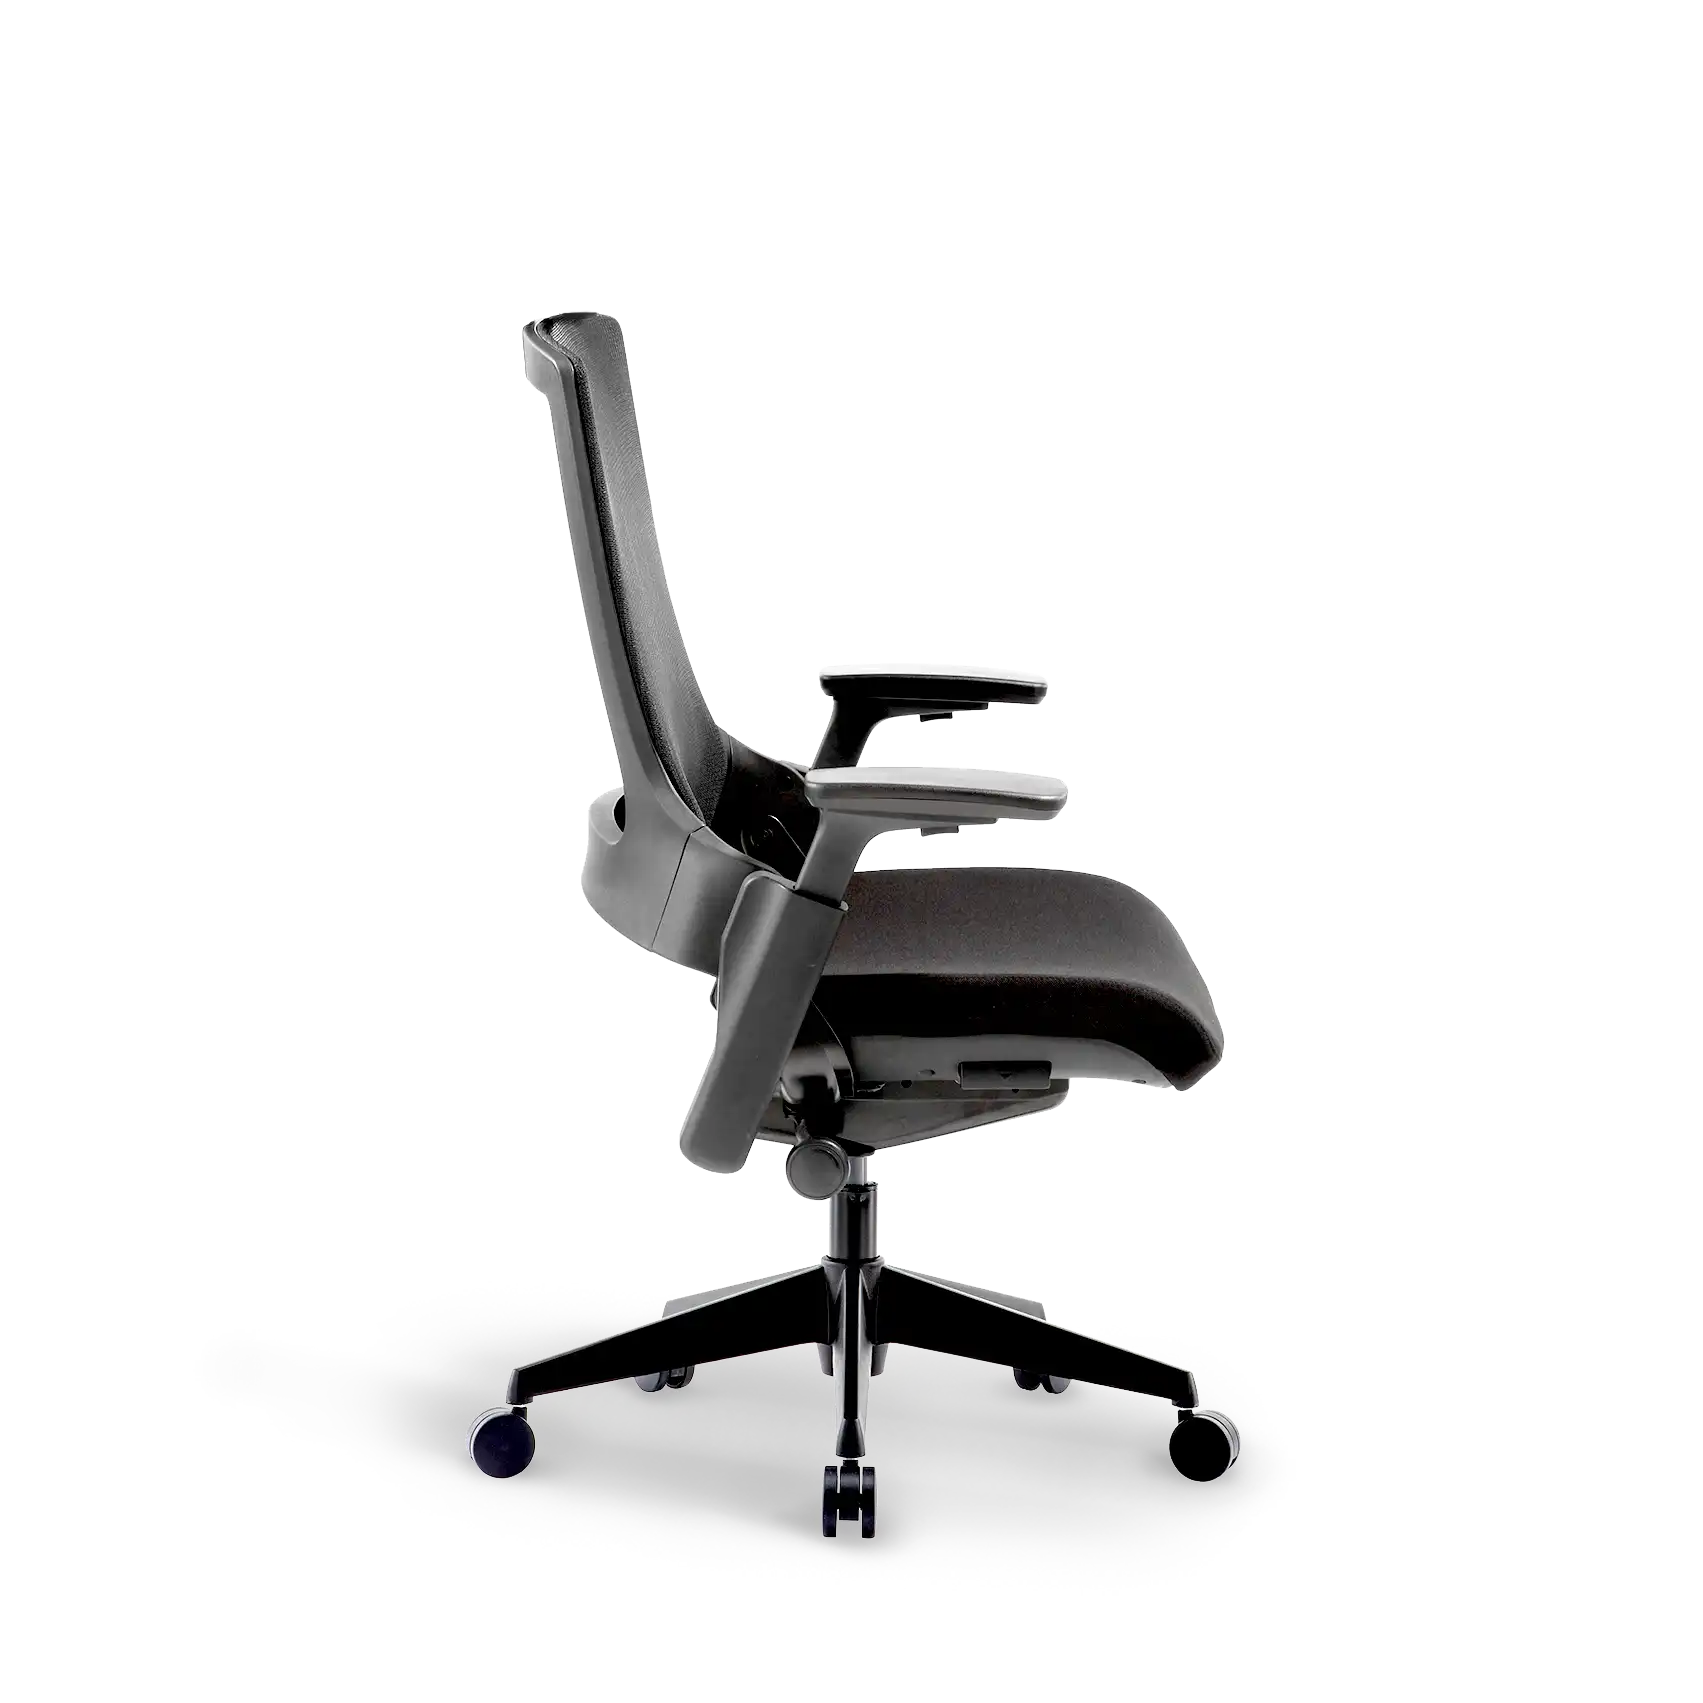 Side view of Flujo Angulo ergonomic office chair with headrest in black